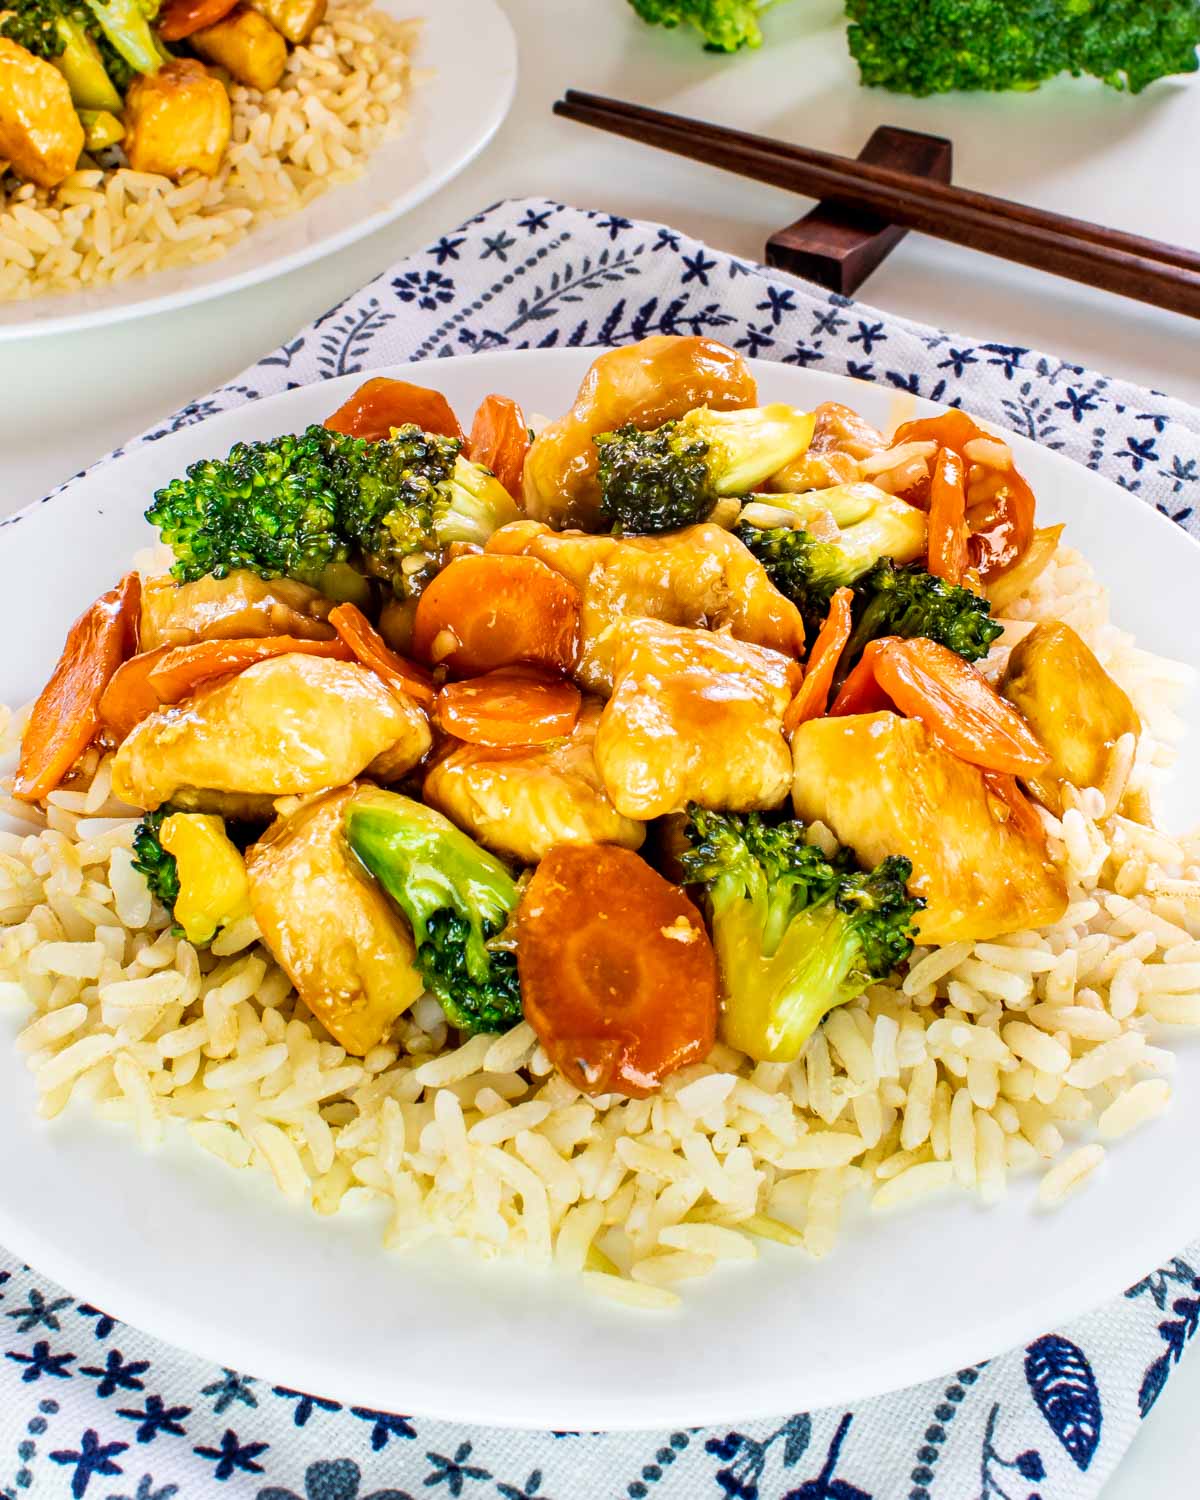 chicken stir fry over rice in a white dish.